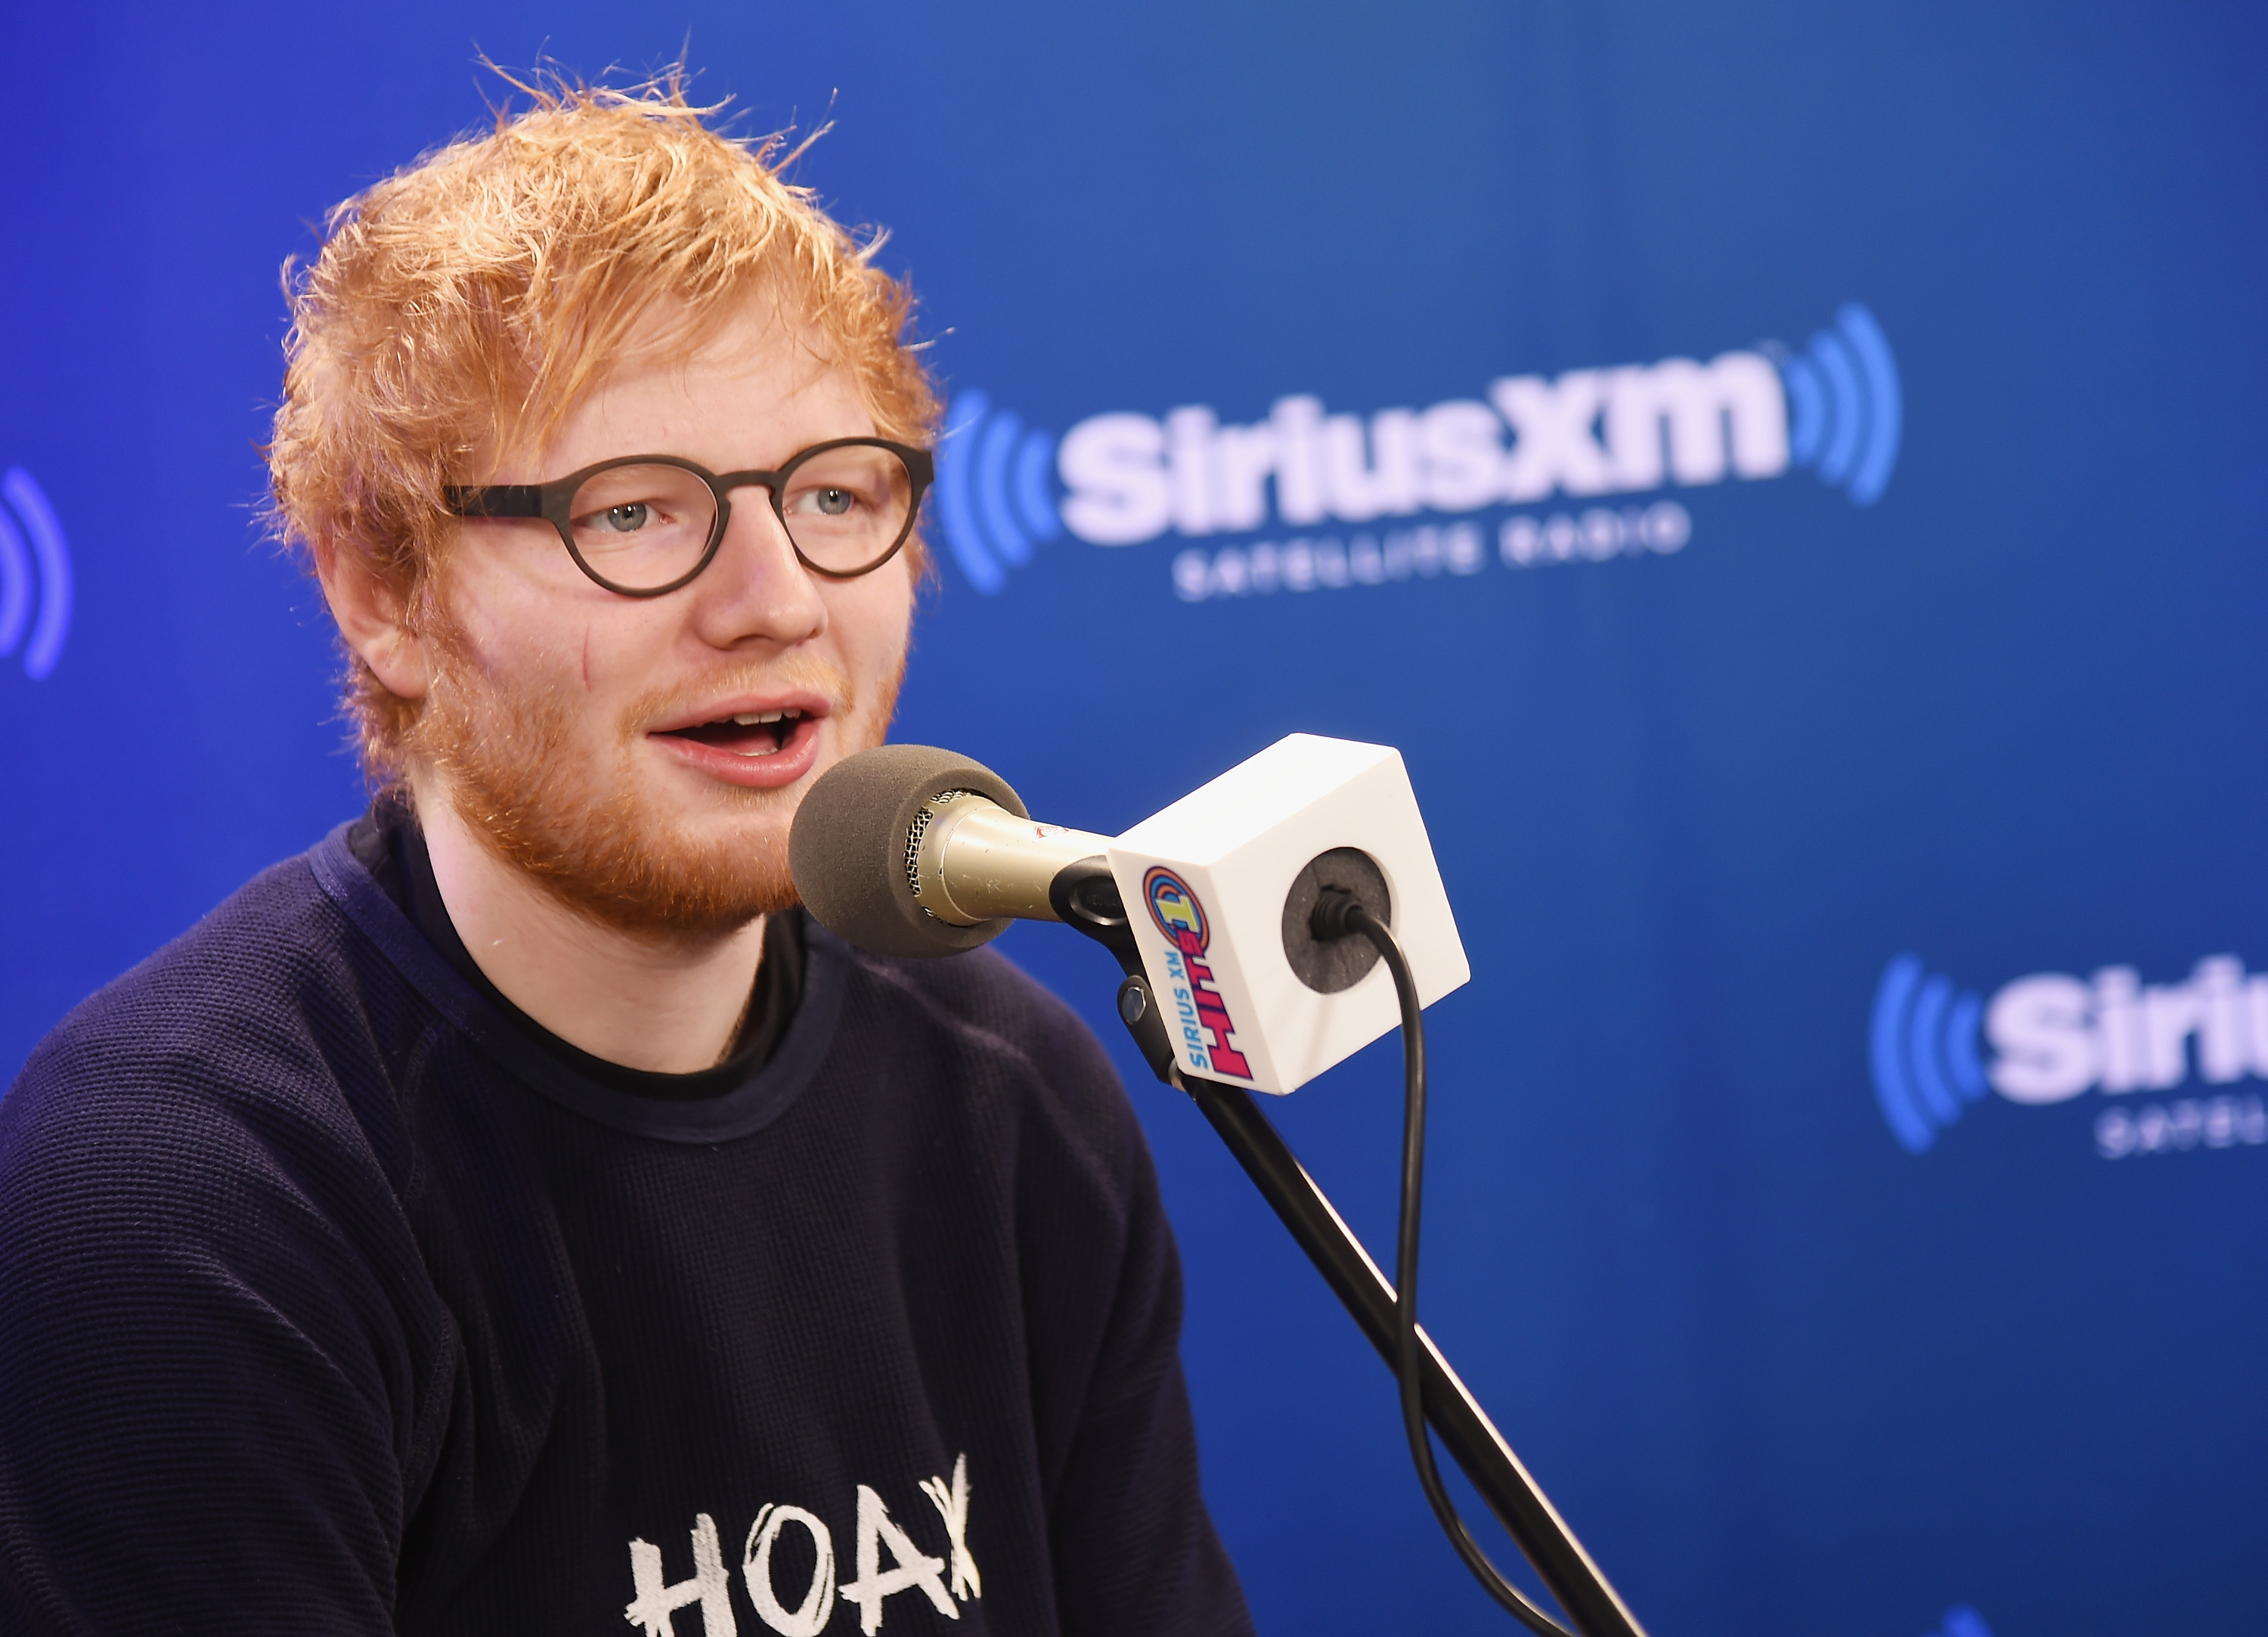 Ed Sheeran visits SiriusXM Studios on January 13, 2017 in New York City. (Photo by Michael Loccisano/Getty Images)